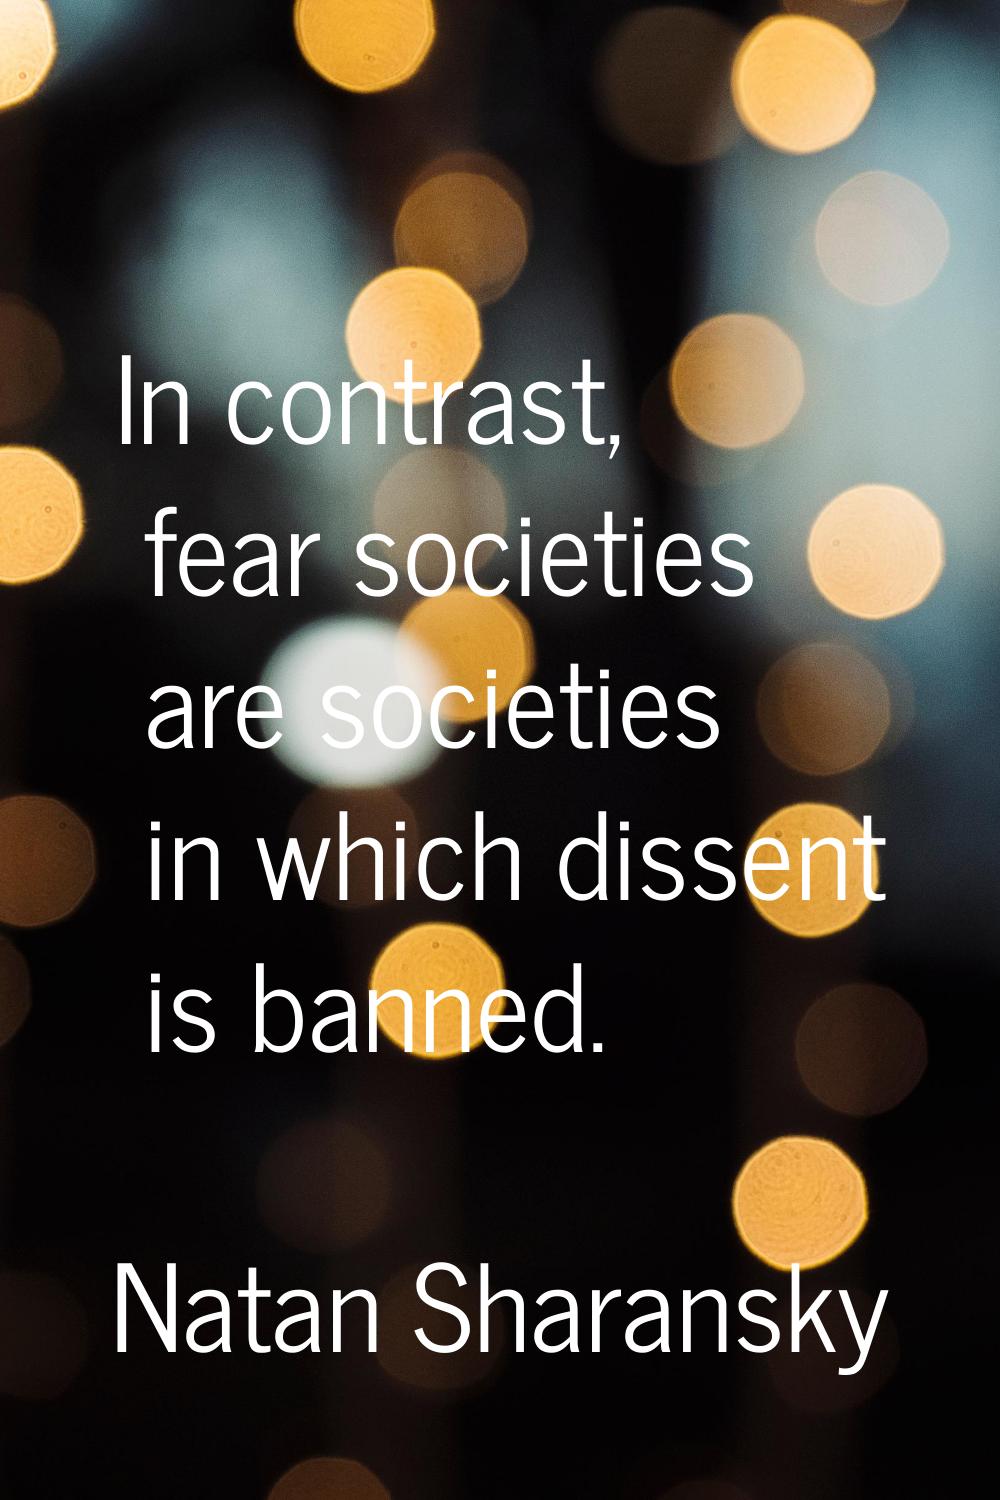 In contrast, fear societies are societies in which dissent is banned.